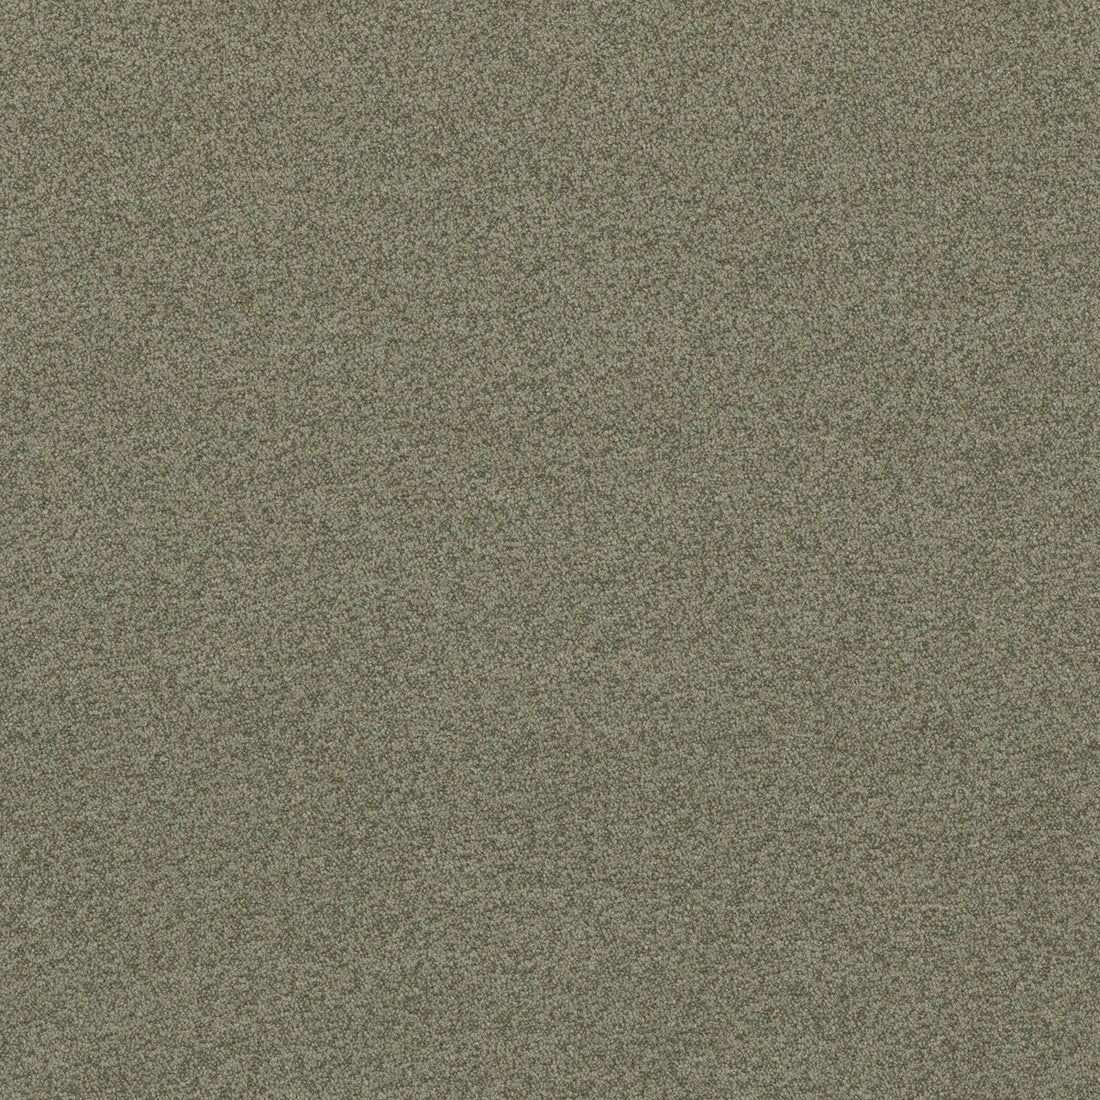 Baker House Boucle fabric in sage color - pattern BF10965.790.0 - by G P &amp; J Baker in the Baker House Boucle collection